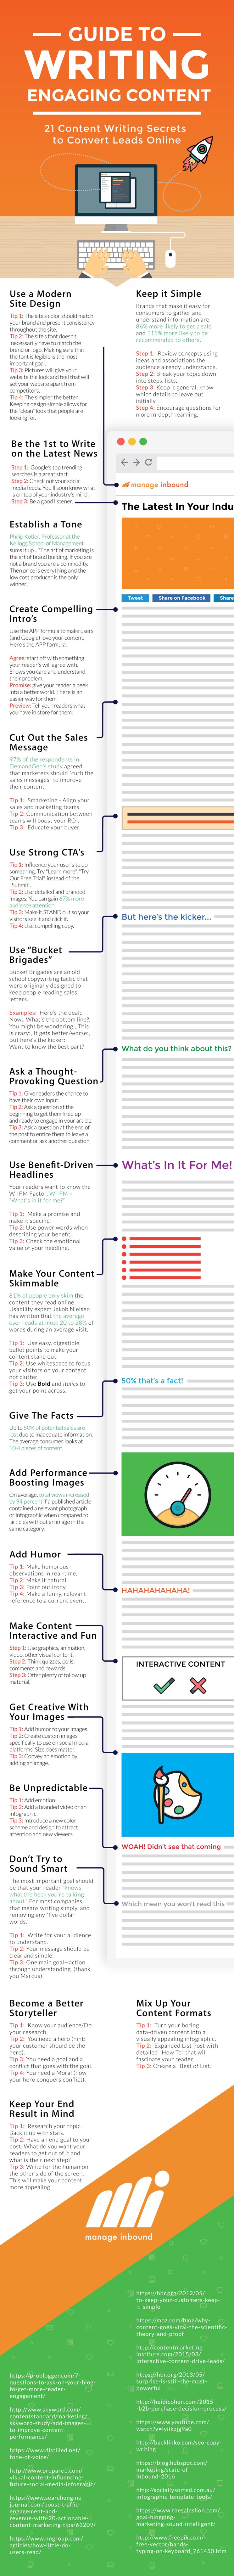 21 super tips for writing engaging website content